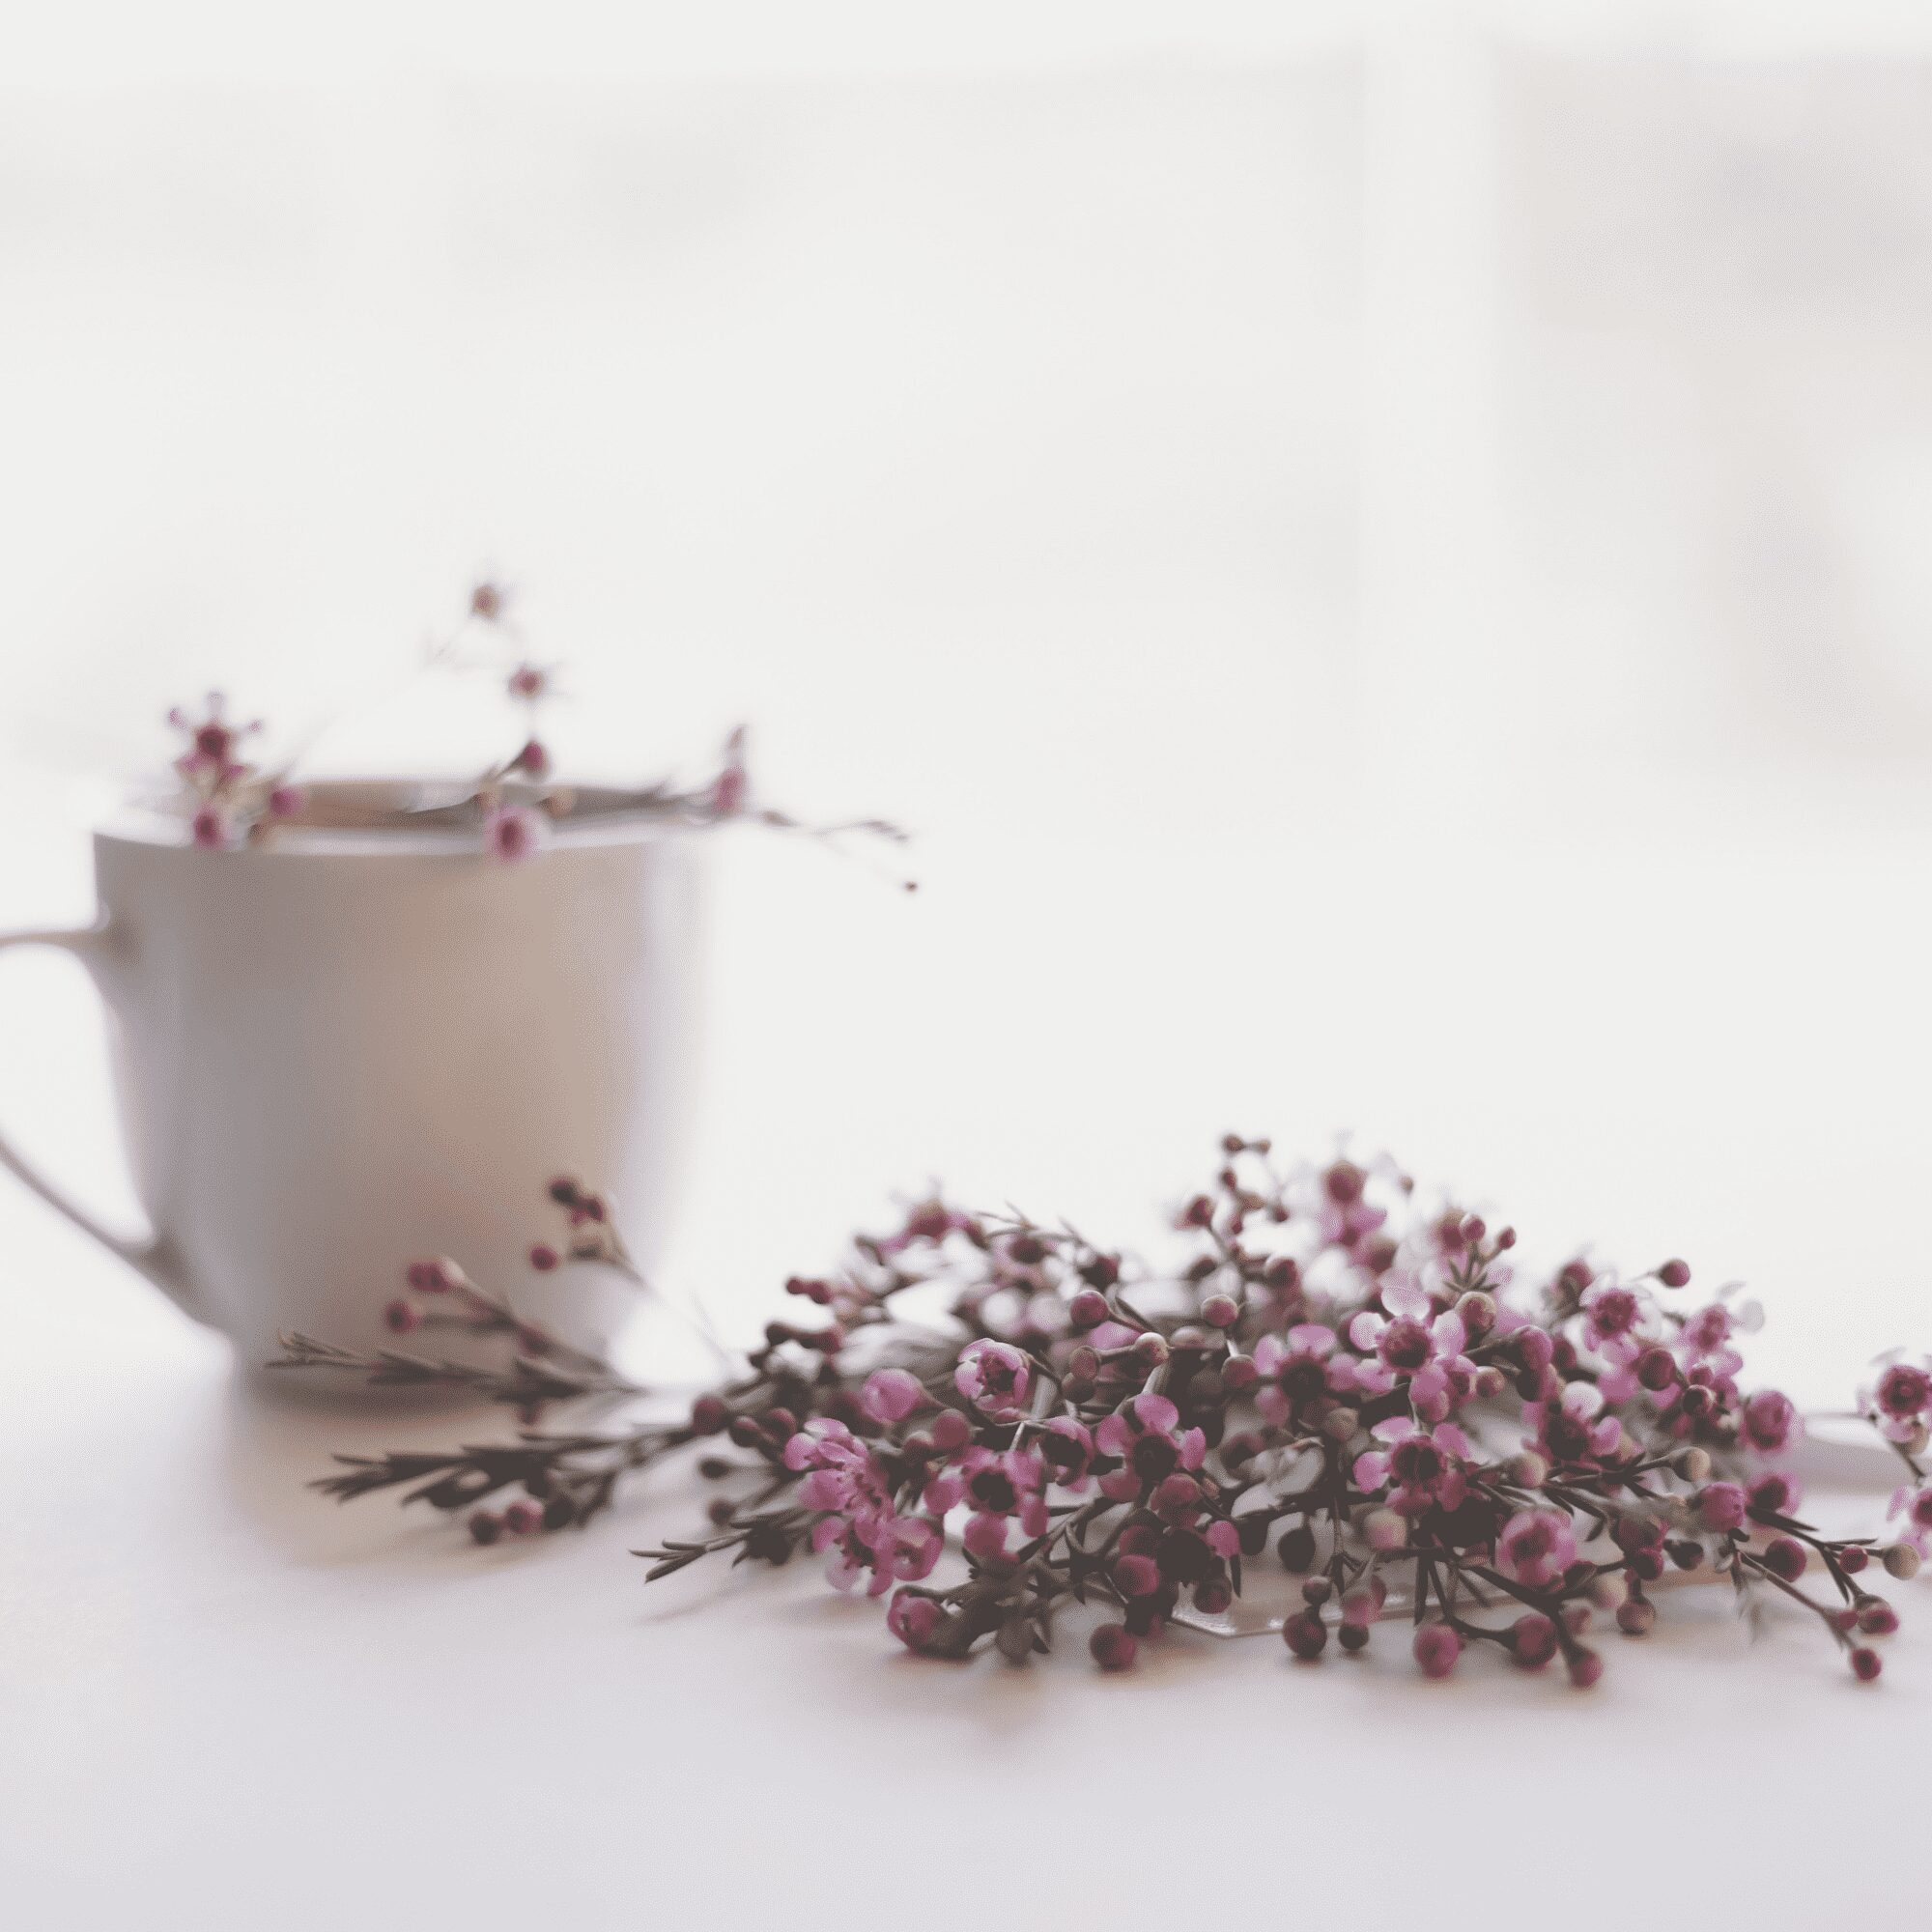 cup with flowers - self-care